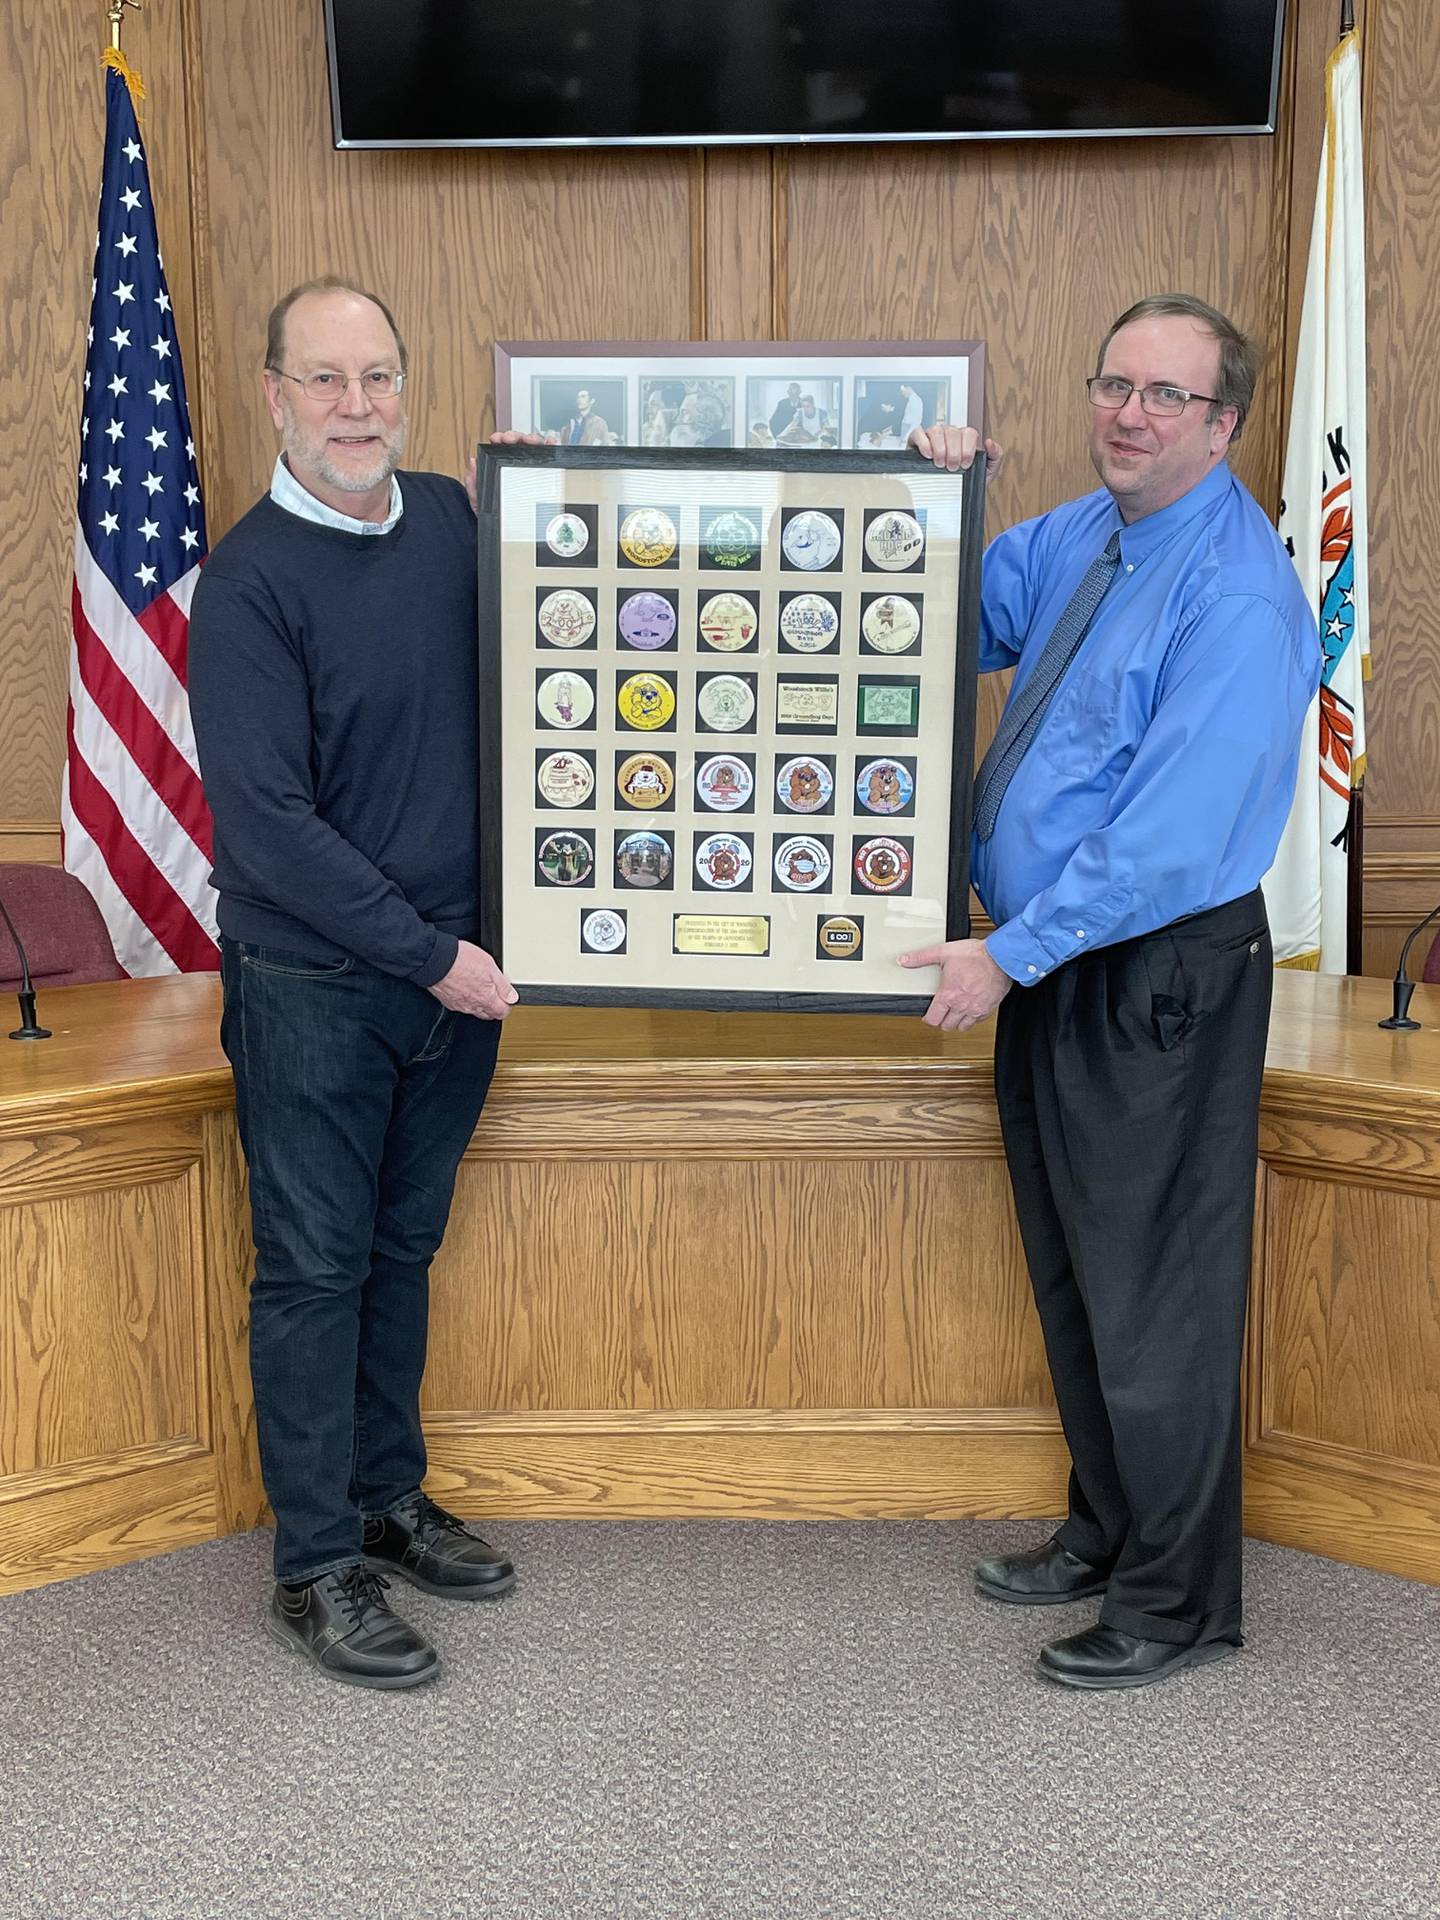 Woodstock City Manager Roscoe Stelford, right, and Rick Bellairs of the Groundhog Days Committee show a framed display of all the commemorative buttons created to mark each year of the city's February Groundhog Days celebration in commemoration of downtown Woodstock serving as the film set for the 1993 classic comedy "Groundhog Day," starring Bill Murray.